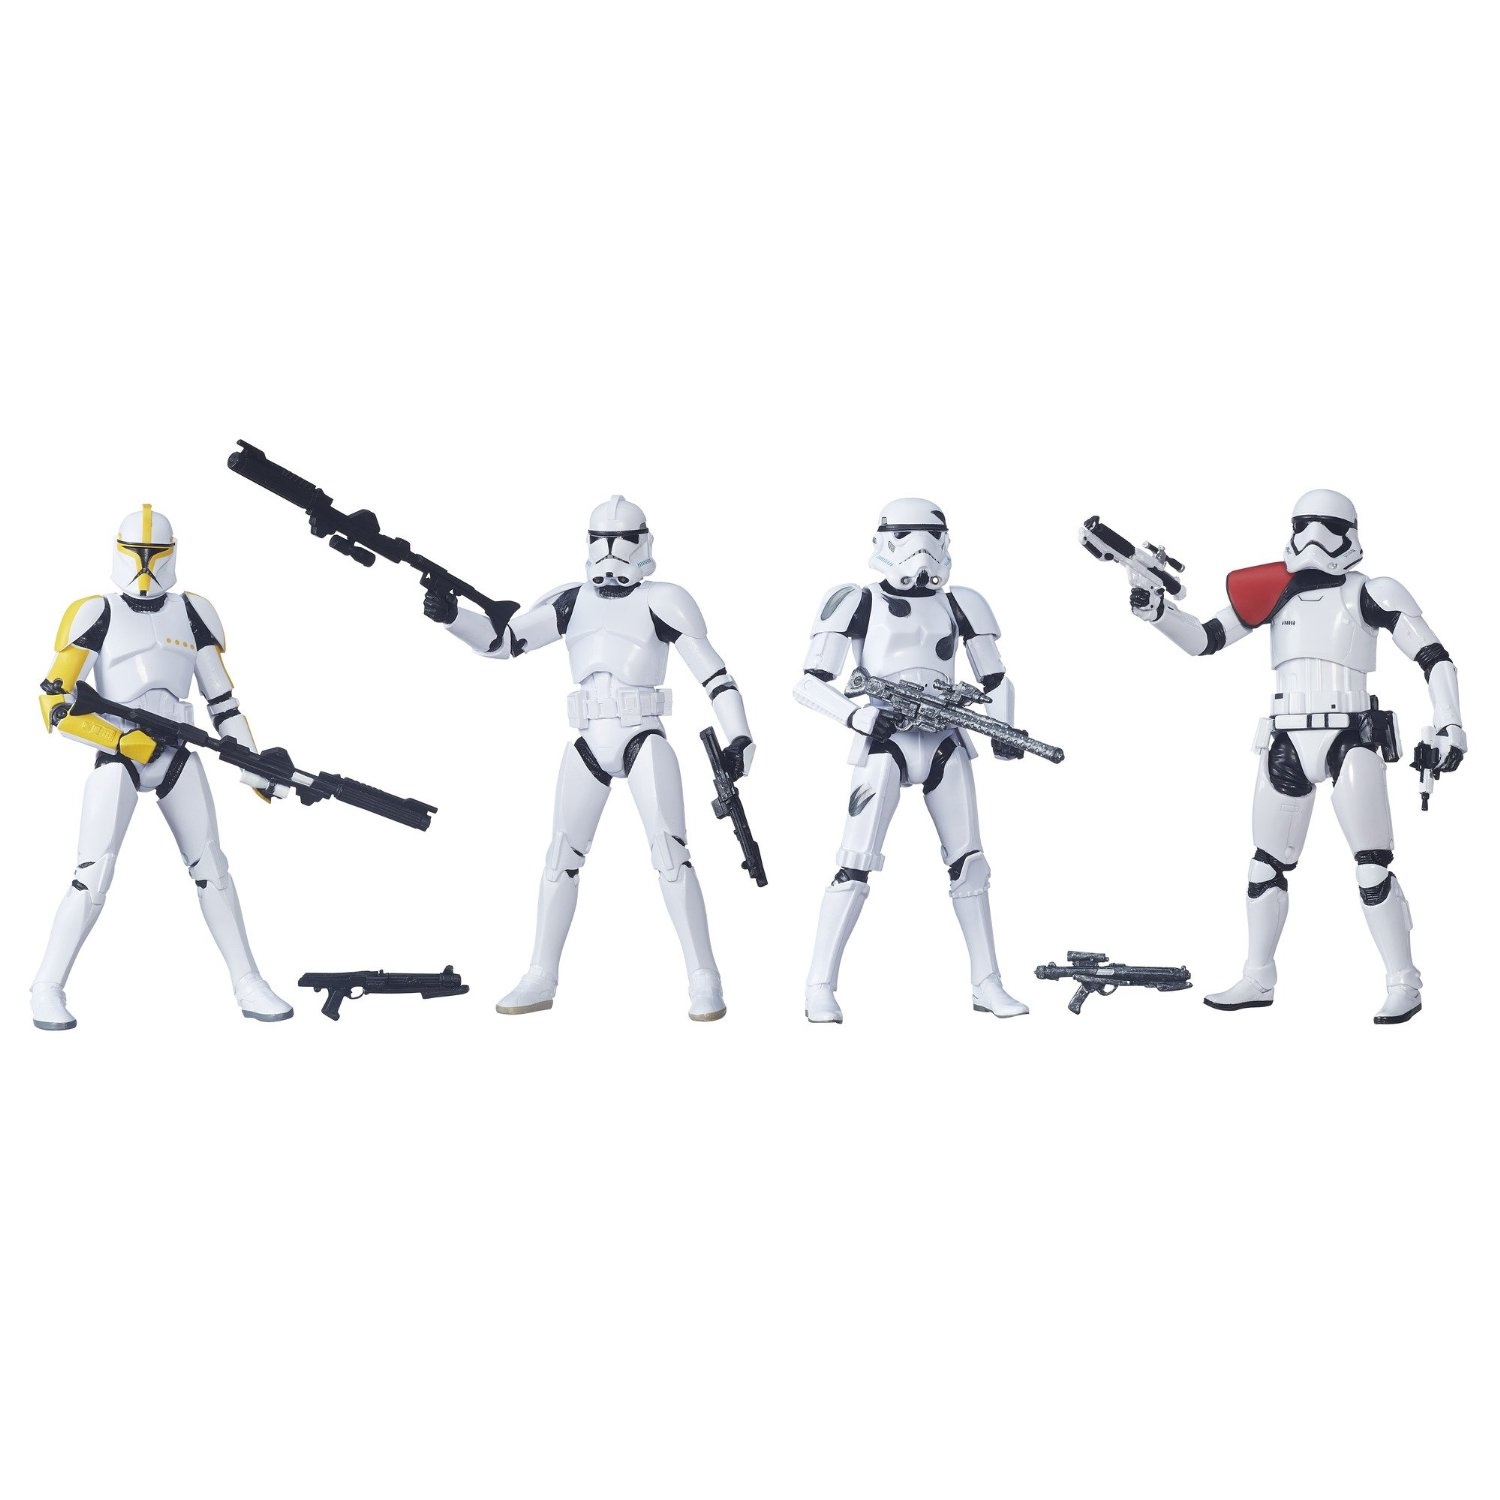 Stormtrooper 4 Pack - Black Series Red - 6 inches action figure